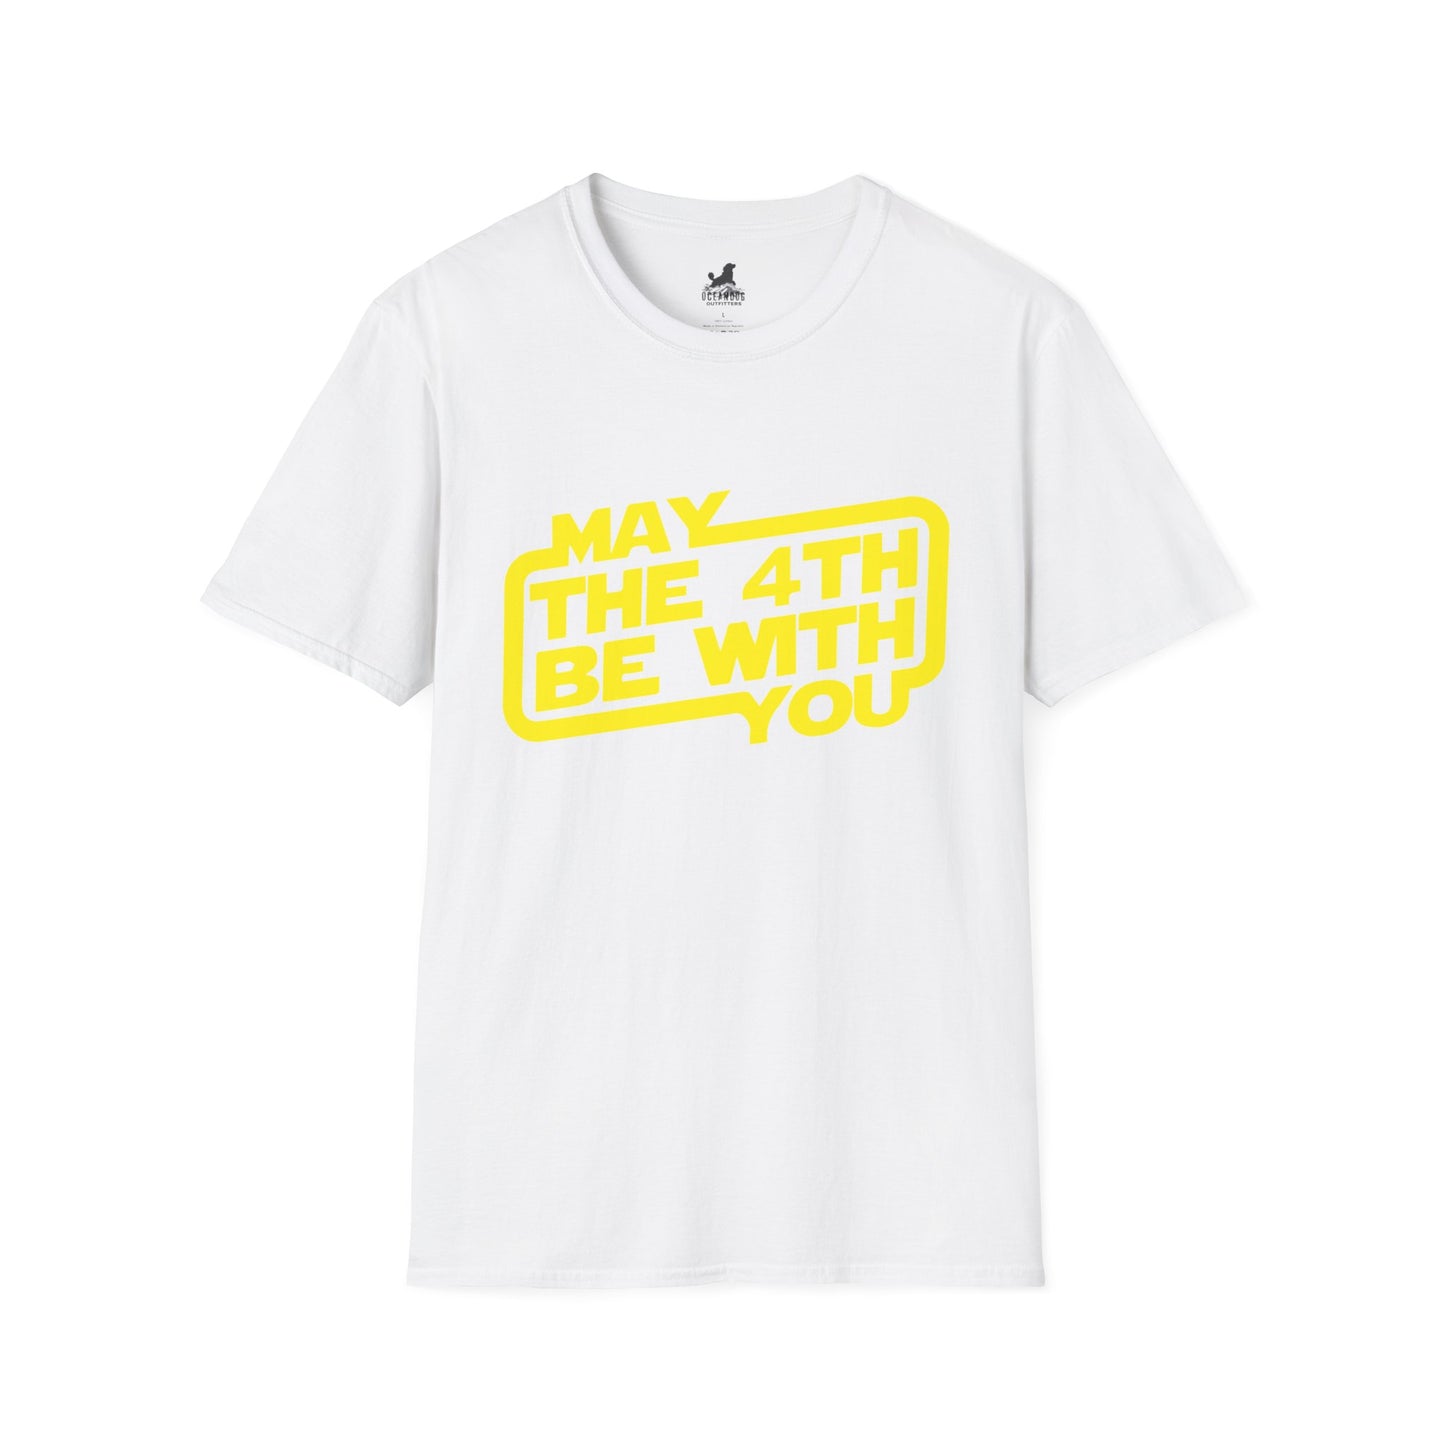 May the 4th Be With You  T-Shirt